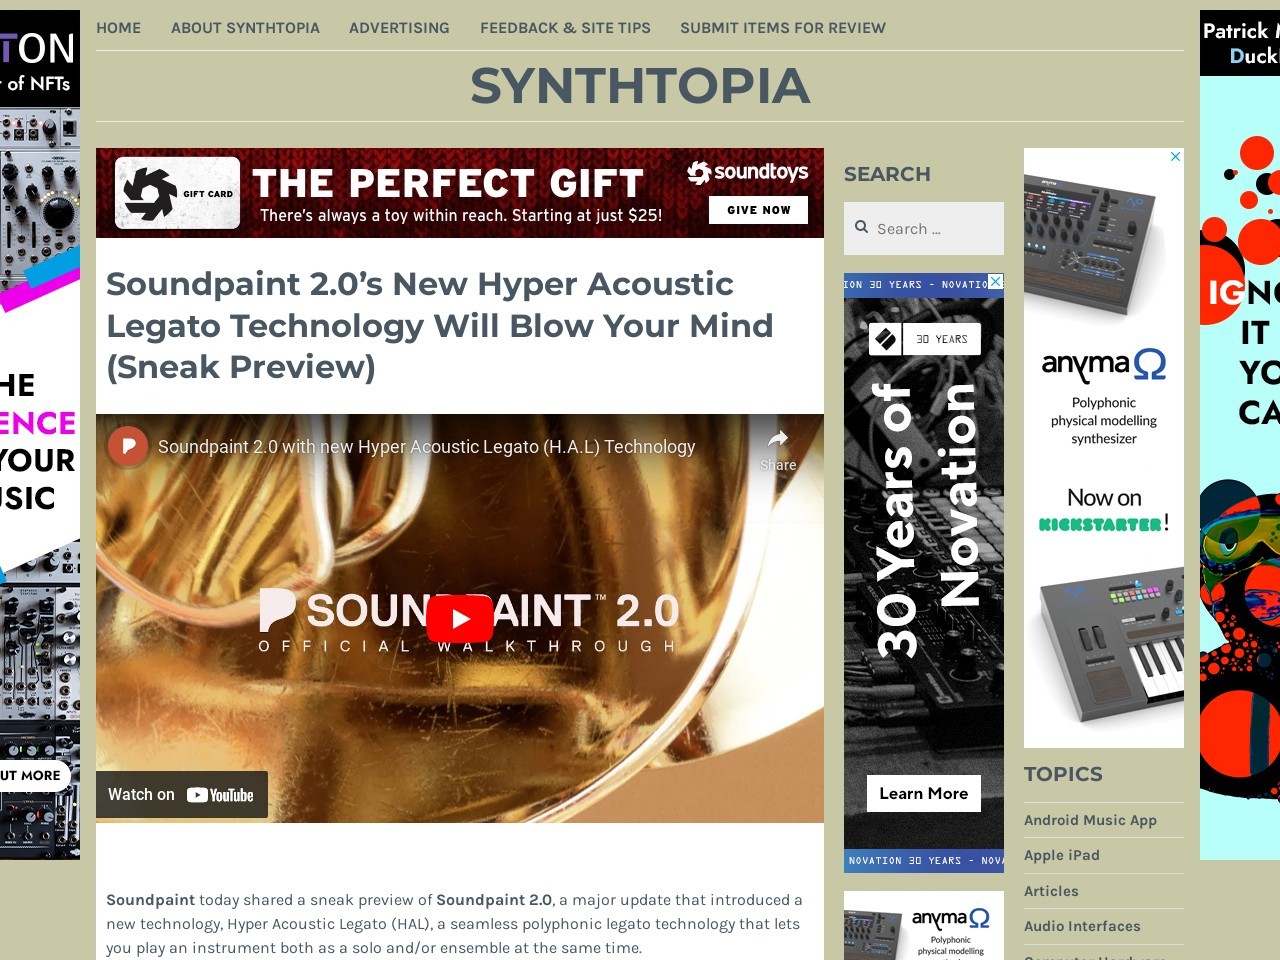 Soundpaint 2.0’s New Hyper Acoustic Legato Technology Will Blow Your Mind (Sneak Preview) – Synthtopia